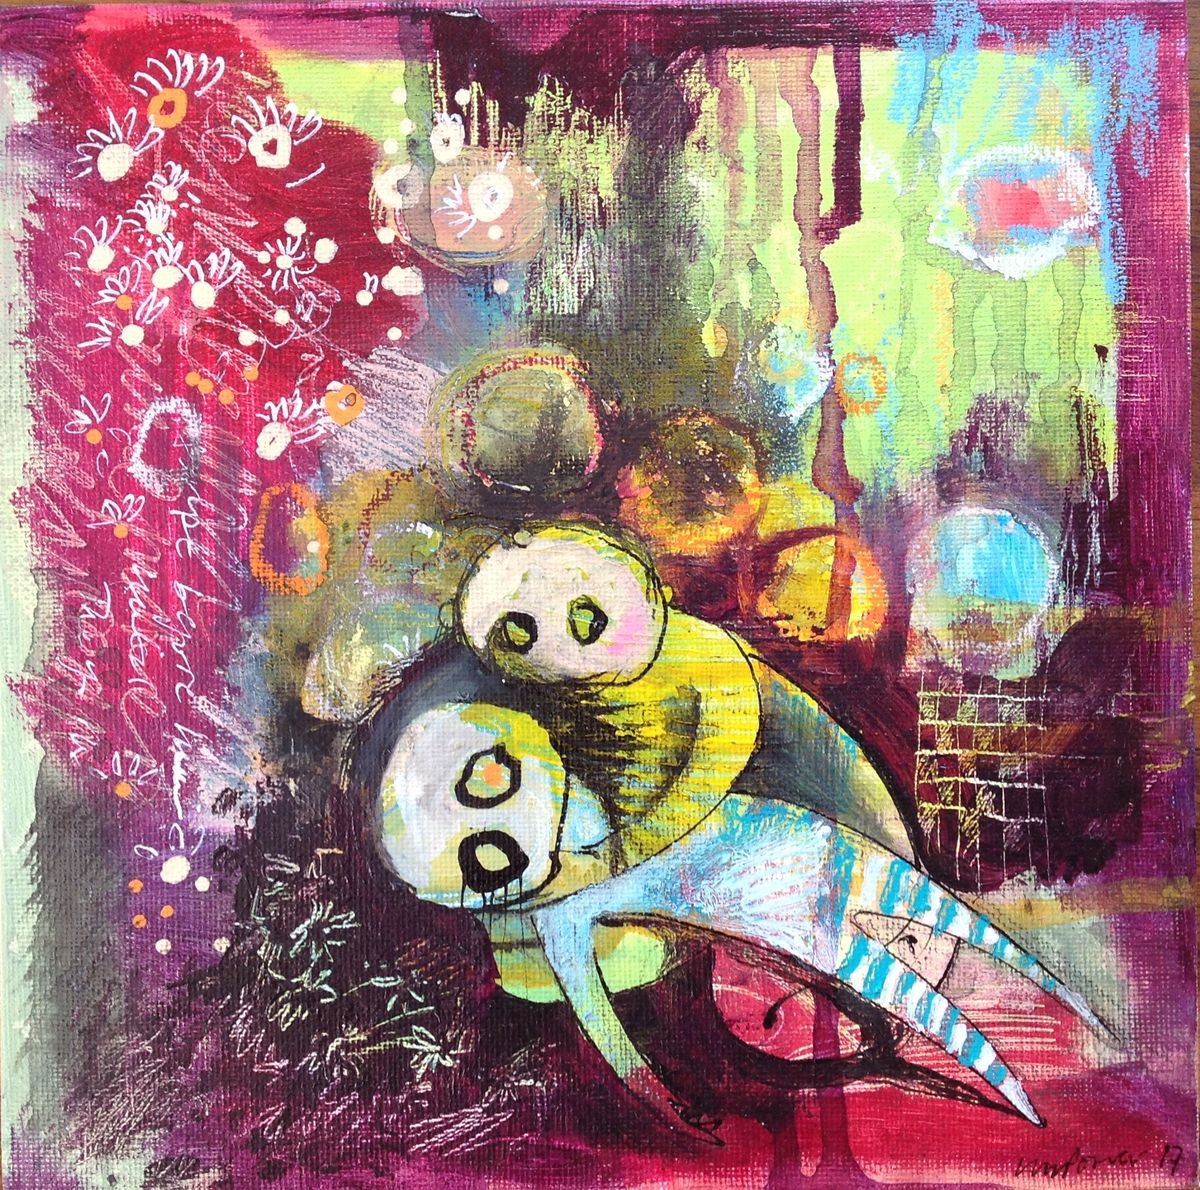 Love and Fear - 8 x 8 mixed media on board by Luci Power